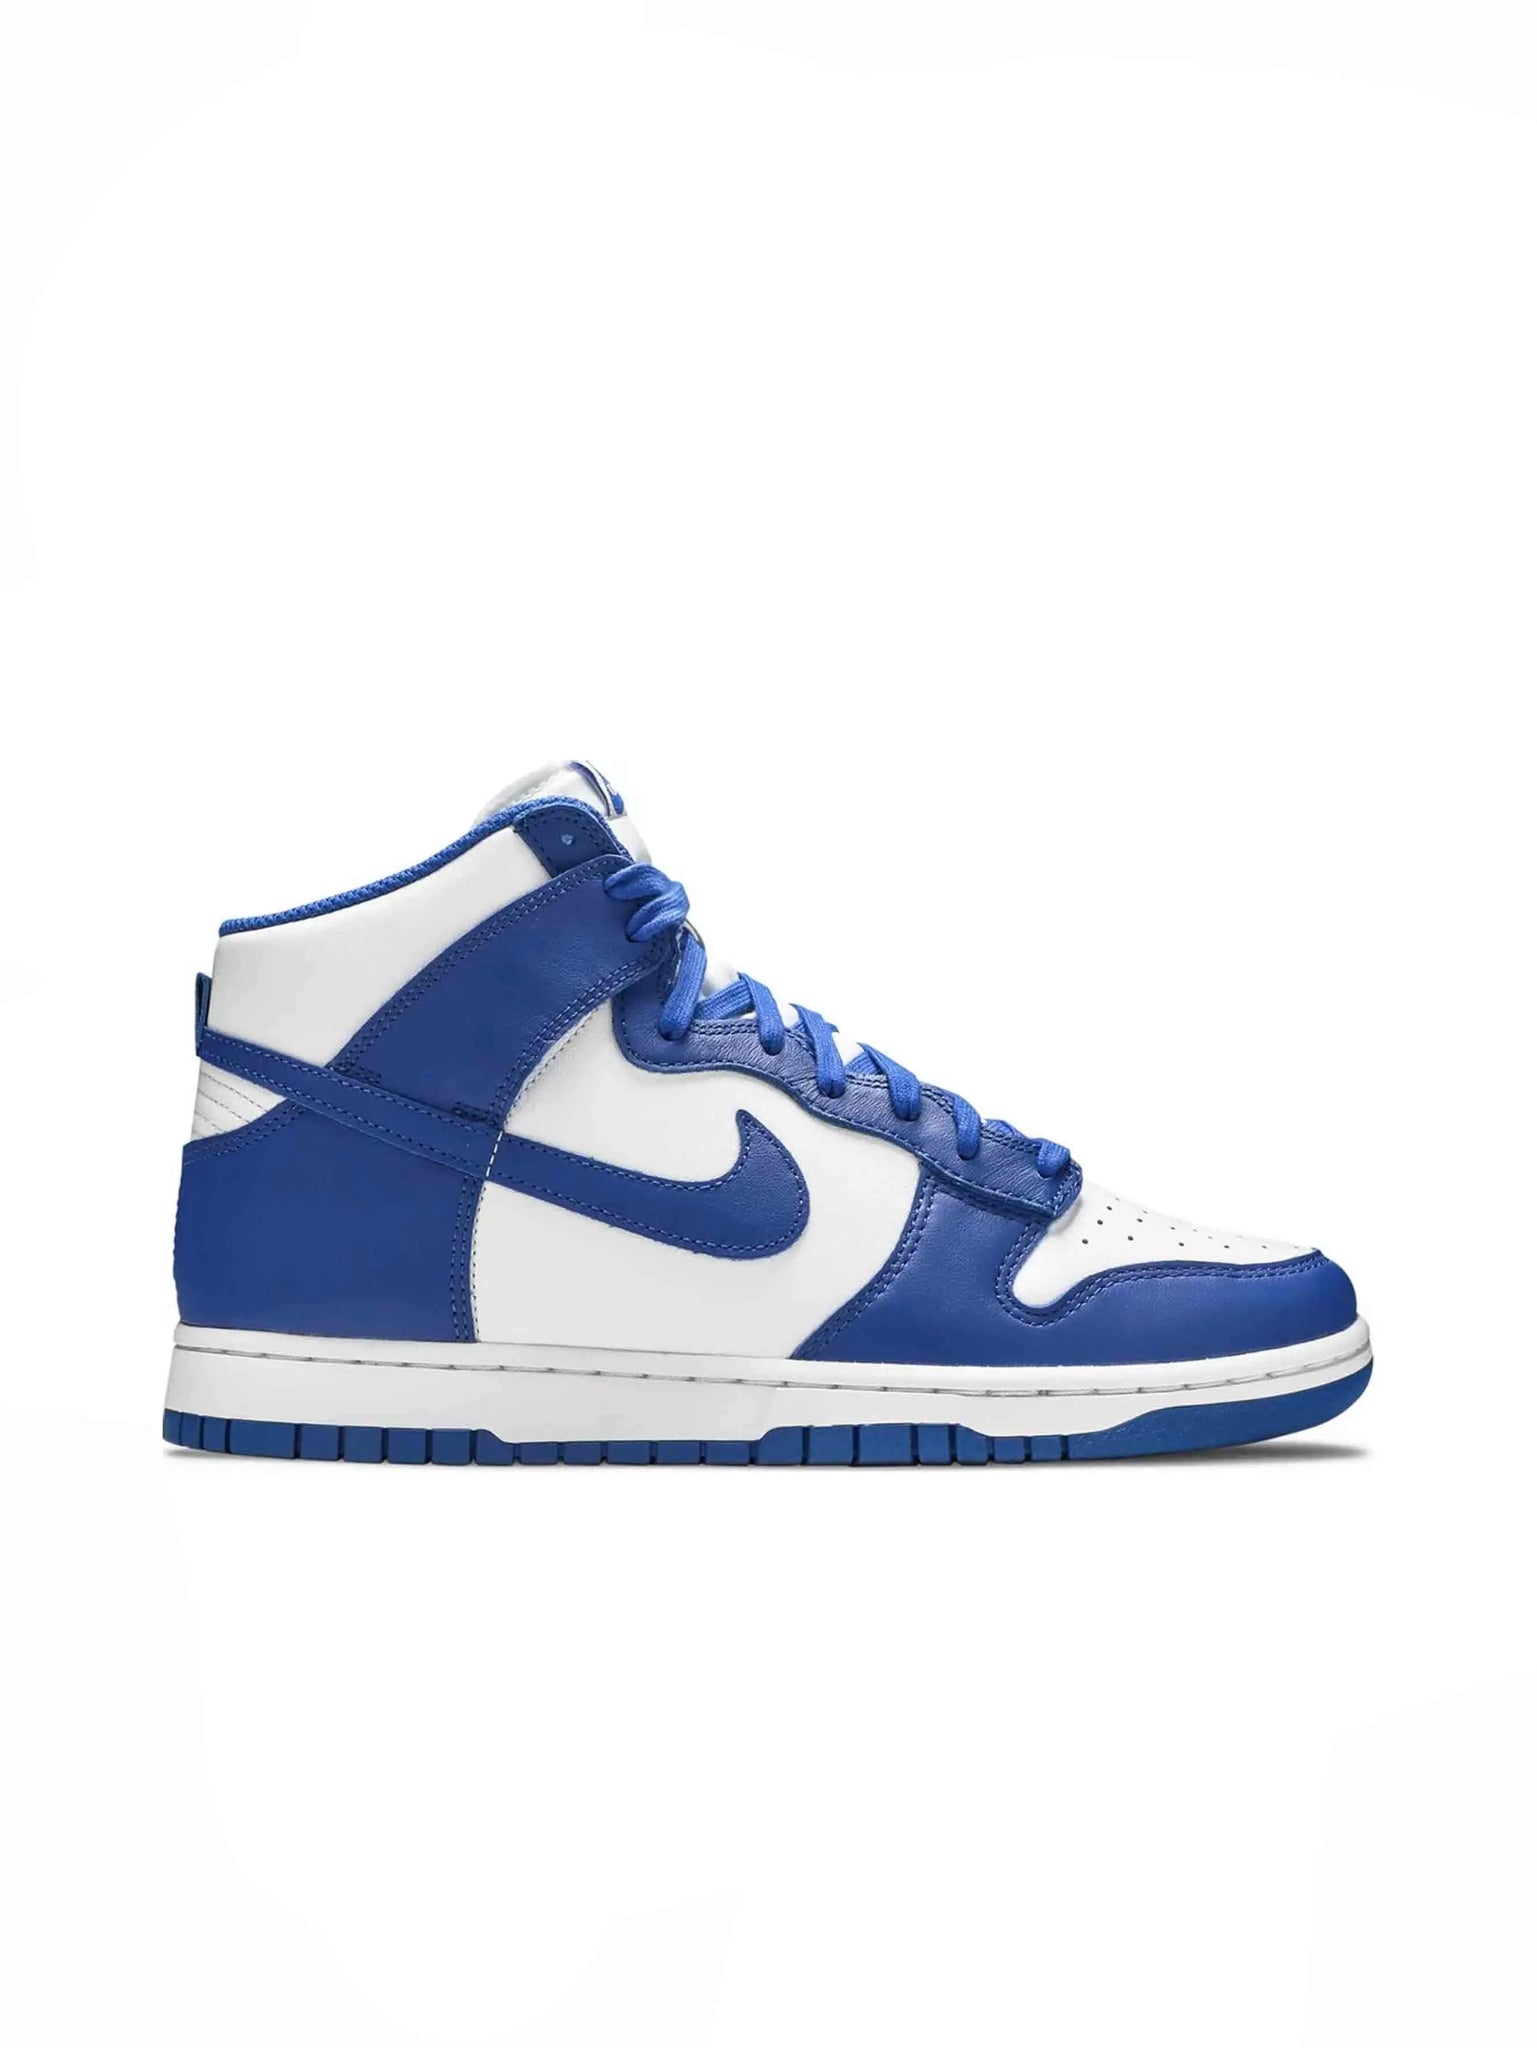 Nike Dunk High Game Royal in Auckland, New Zealand - Shop name